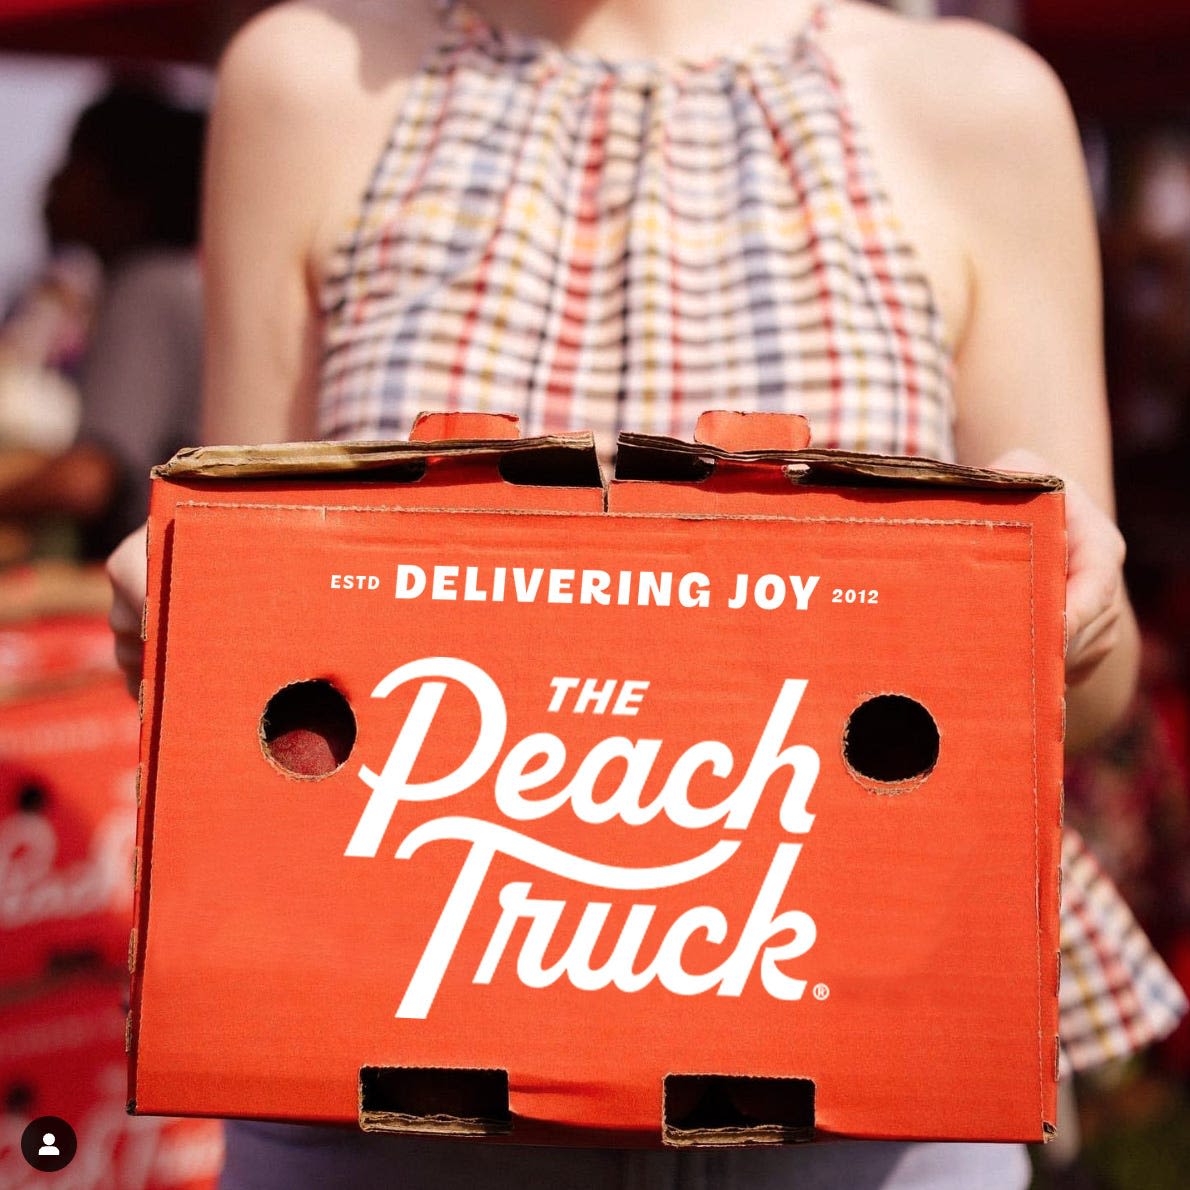 The Peach Truck is back! Where to find it this summer in Tennessee